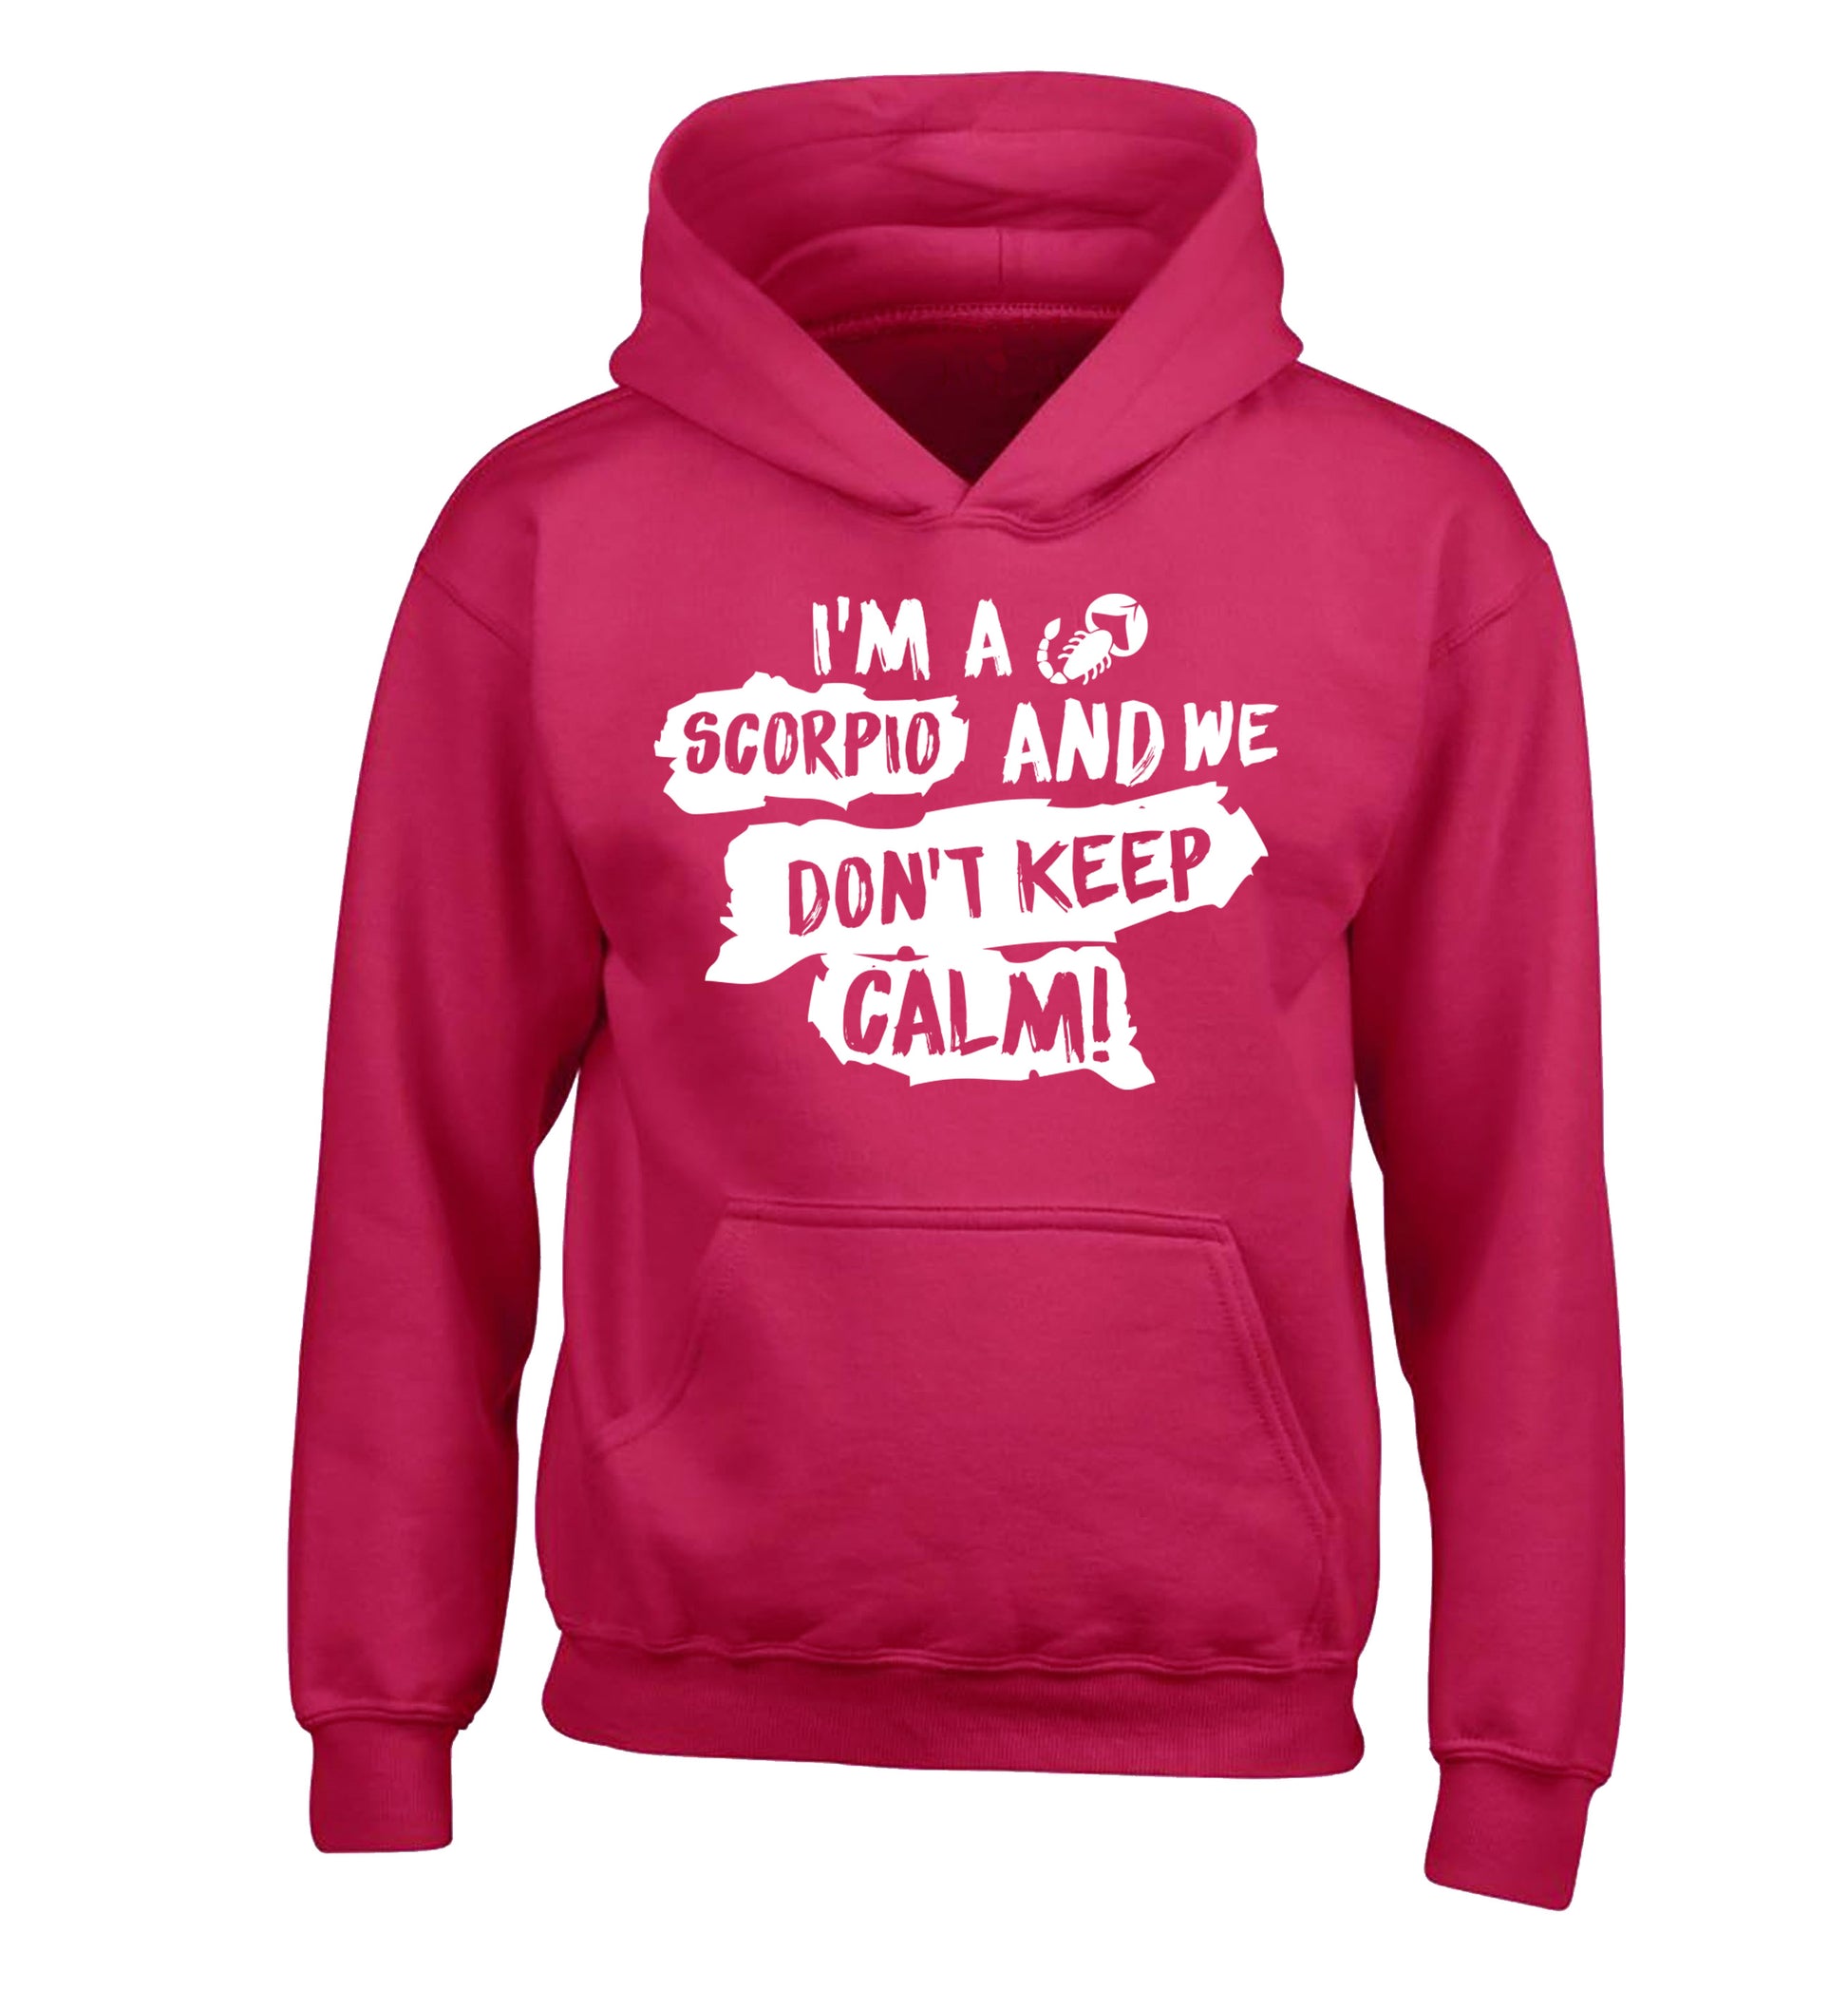 I'm a scorpio and we don't keep calm children's pink hoodie 12-13 Years